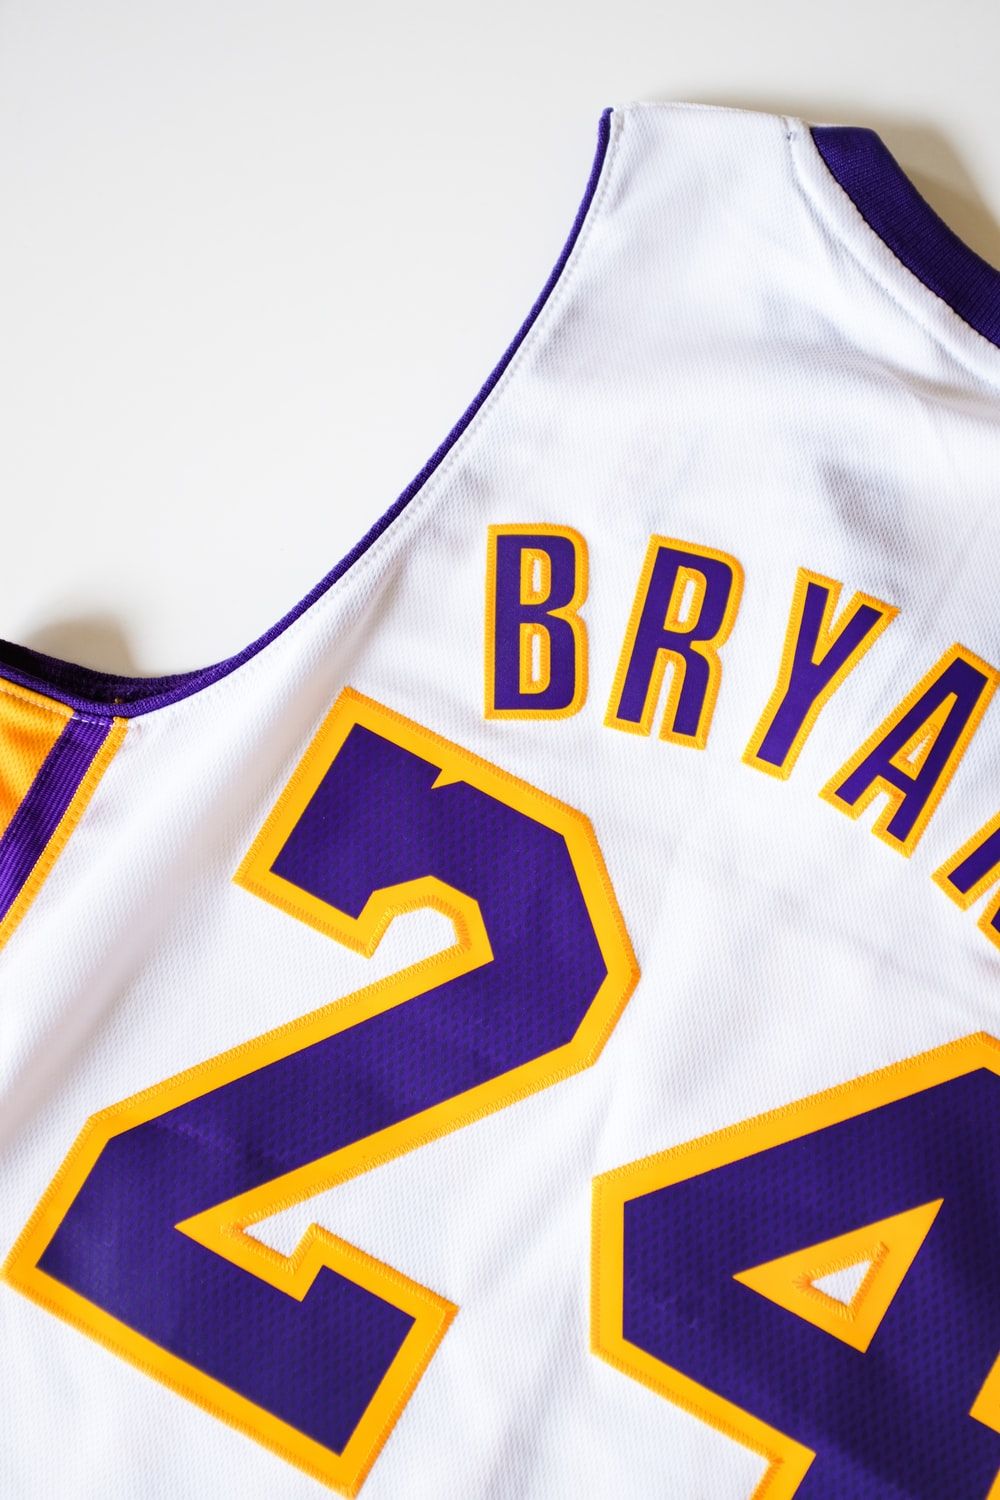 Lakers Picture. Download Free Image